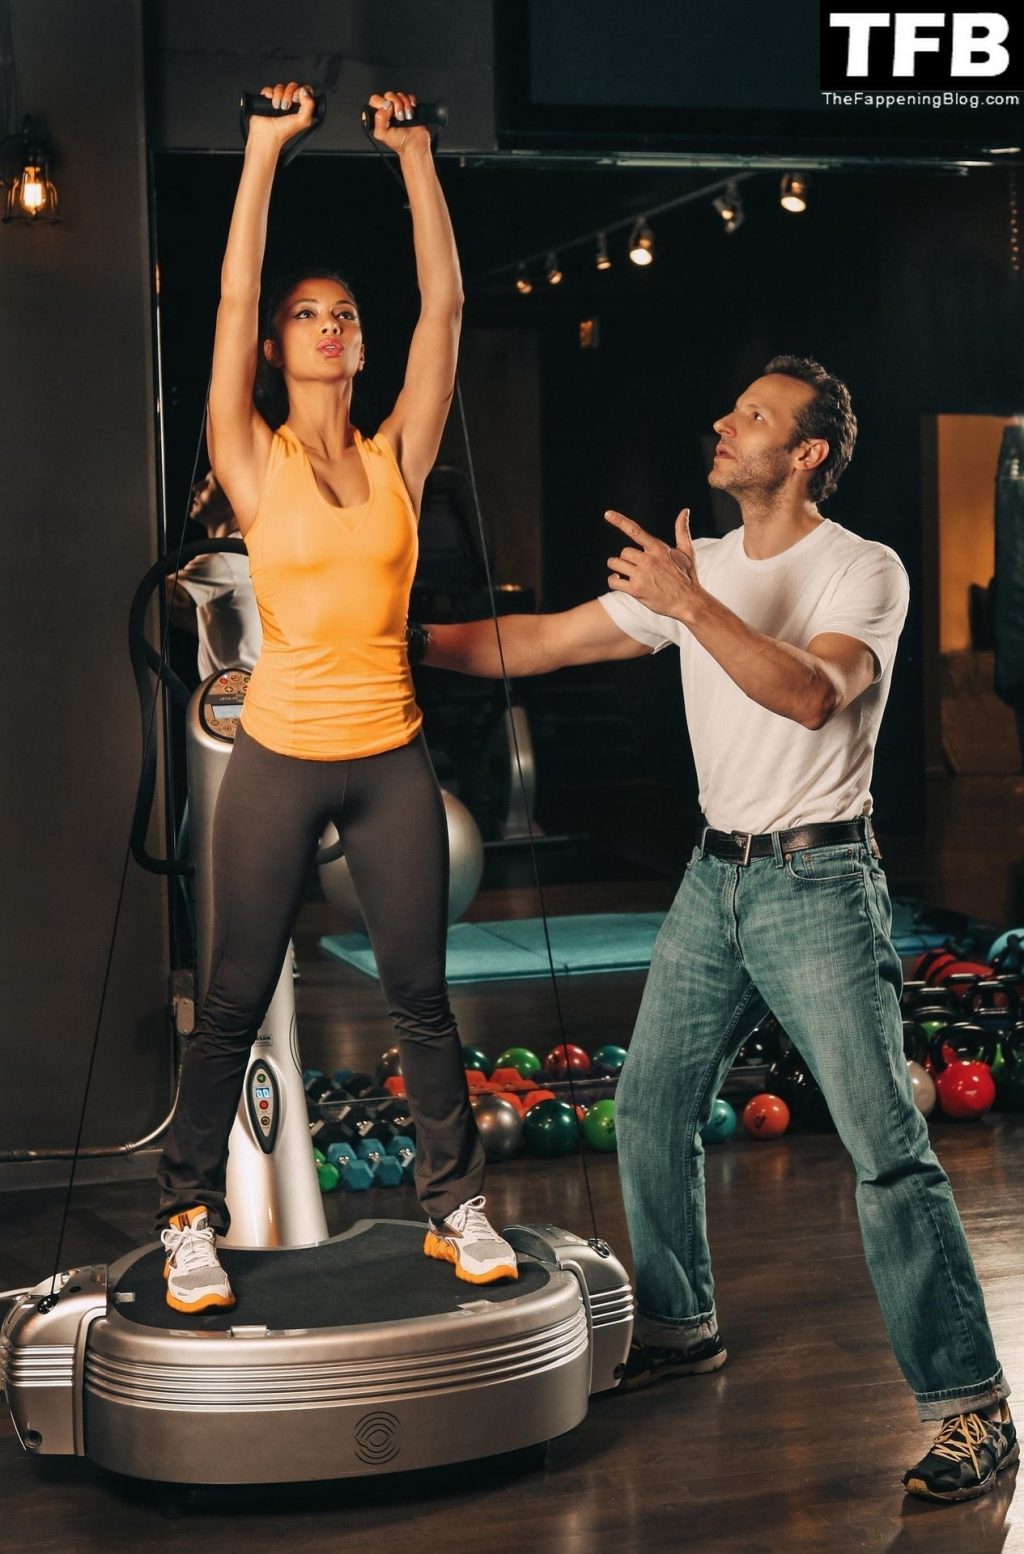 Busty Nicole Scherzinger Works Out With a Personal Trainer (11 Photos)